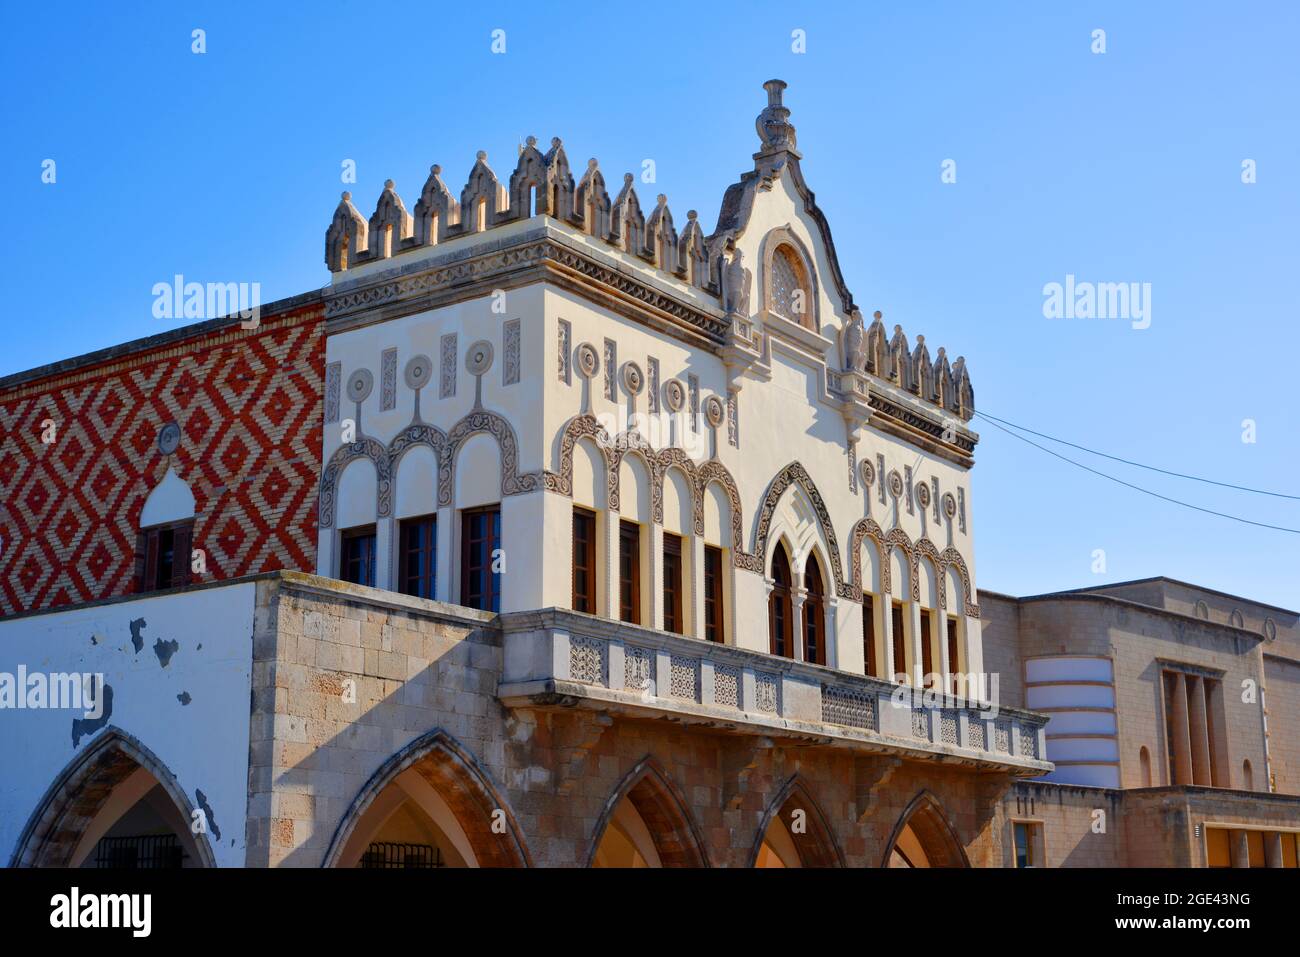 Rhodes, Town, Greece, beautiful architecture details at the Palazzo de Governo Stock Photo